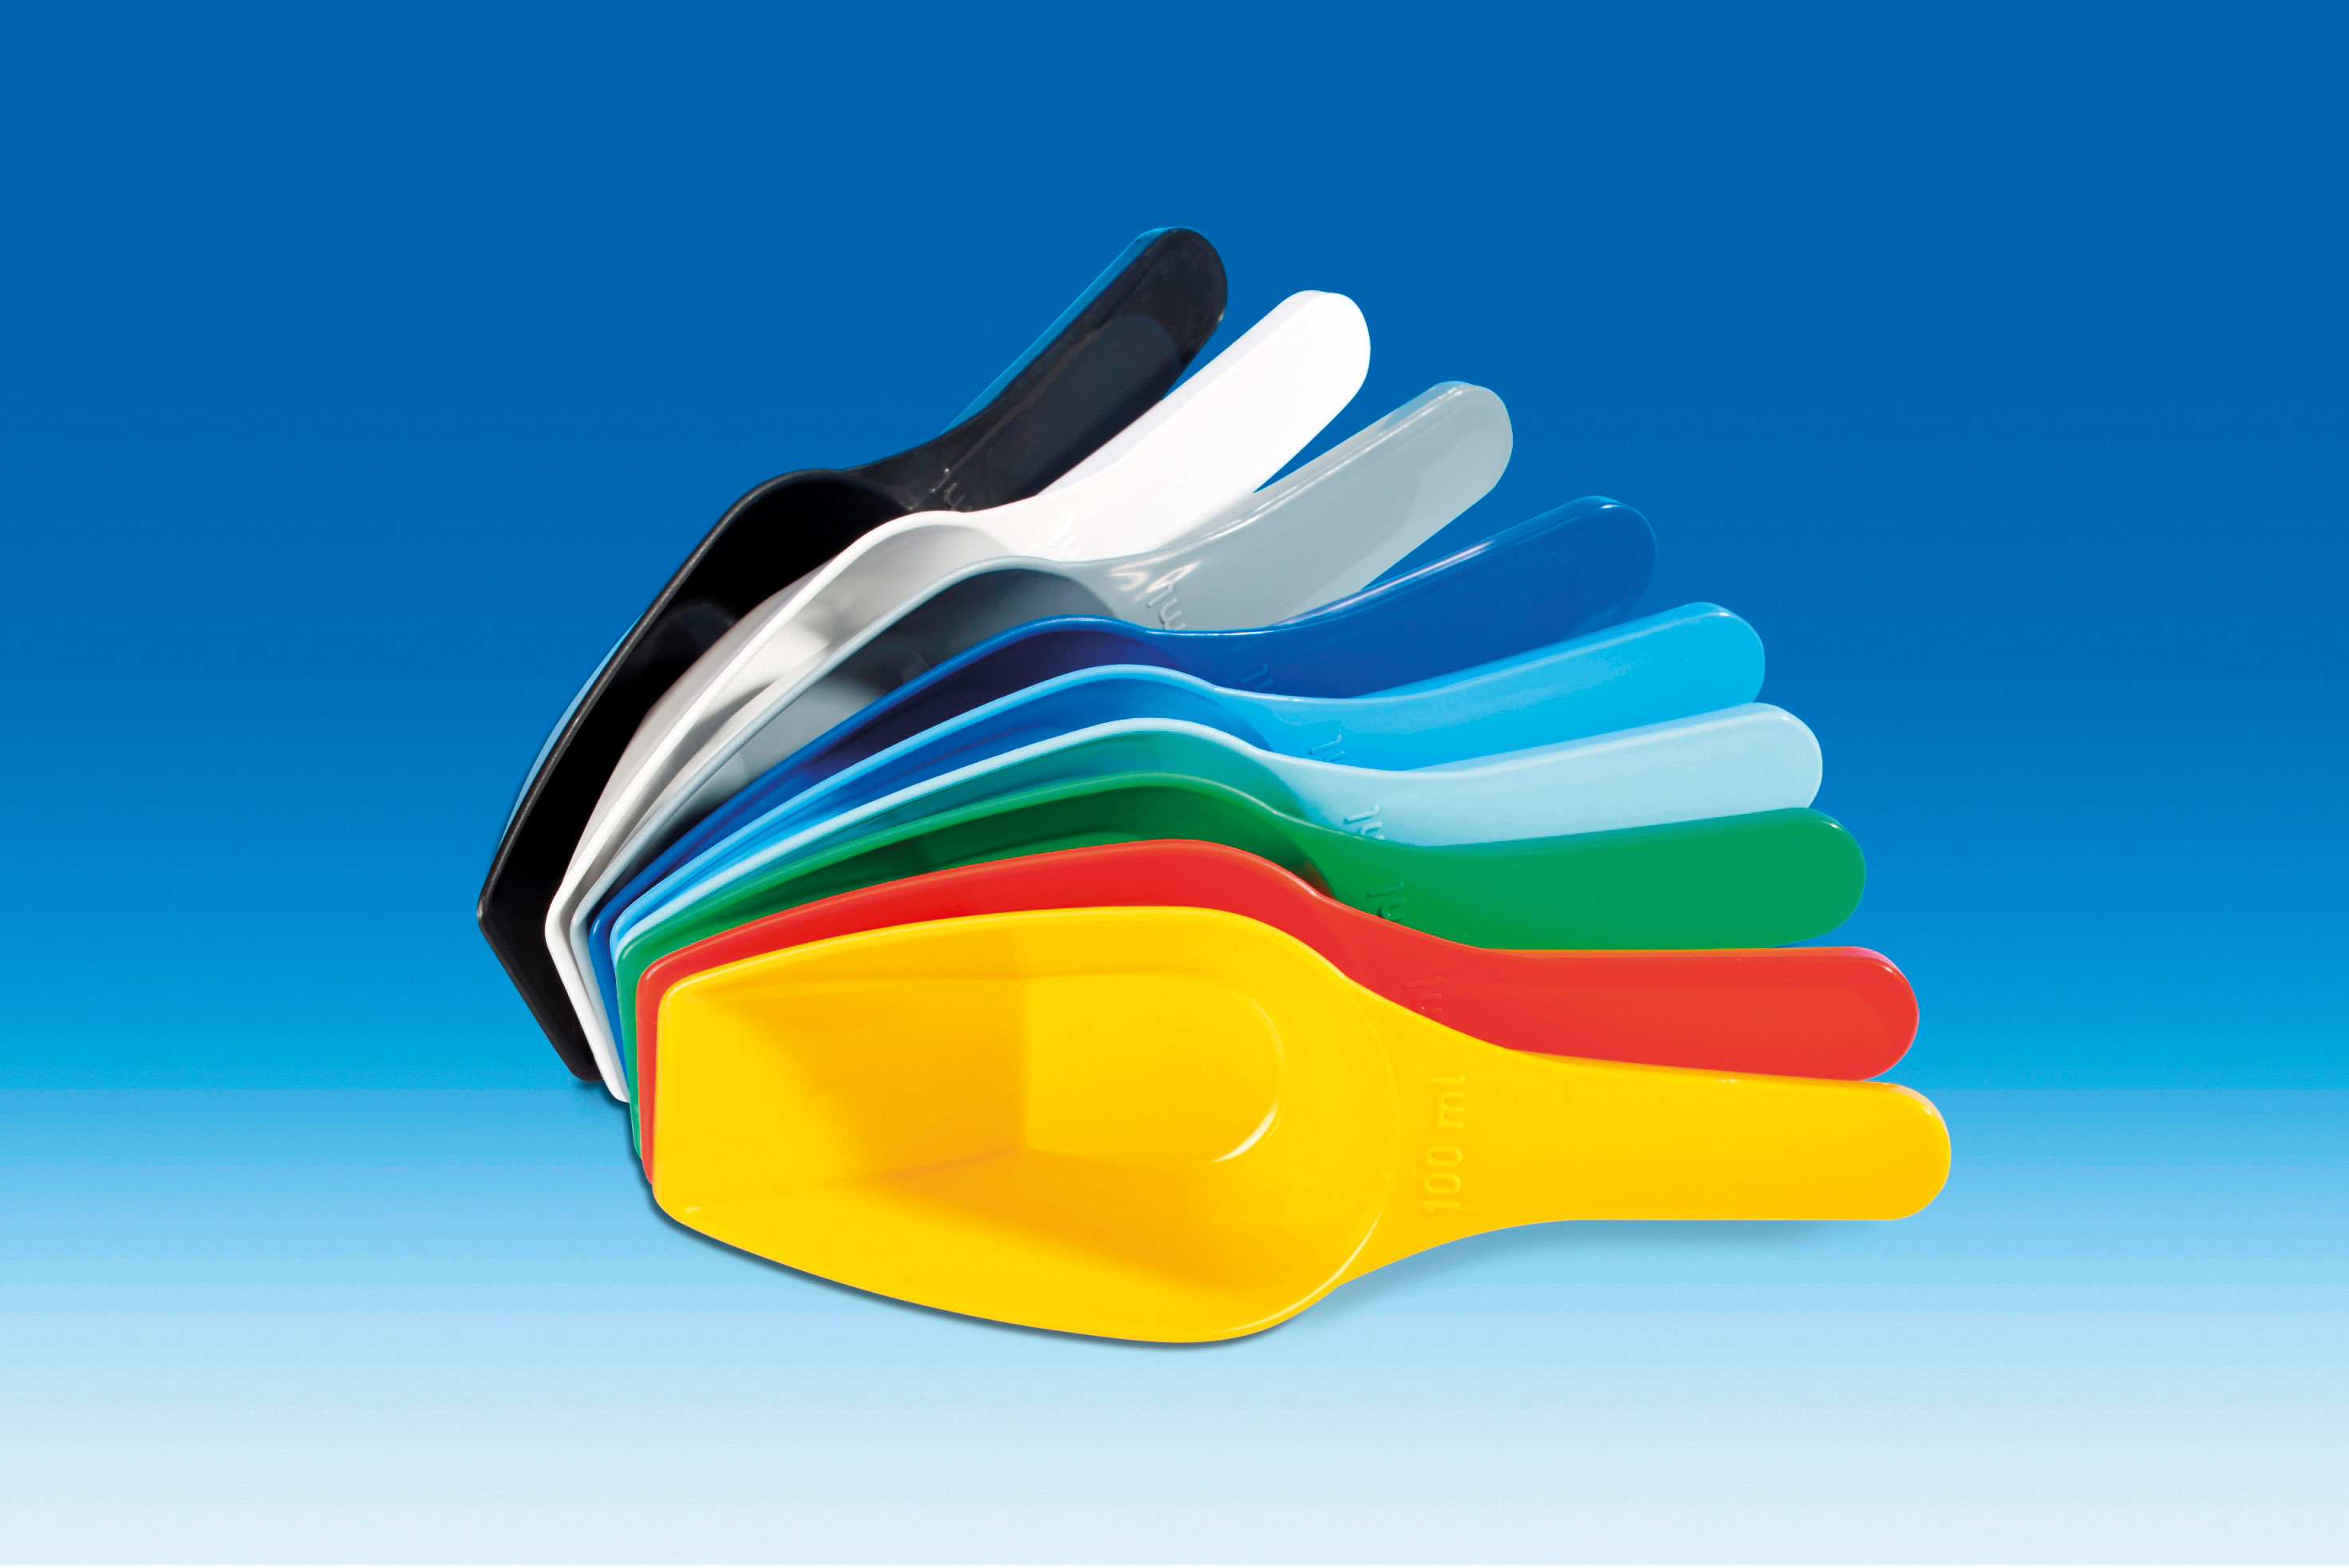 Coloured scoops, PP. VITLAB®. Volume (ml): 100. Colour: Set: white, red, grey, black, yellow, blue, green btight blue (1 item each)